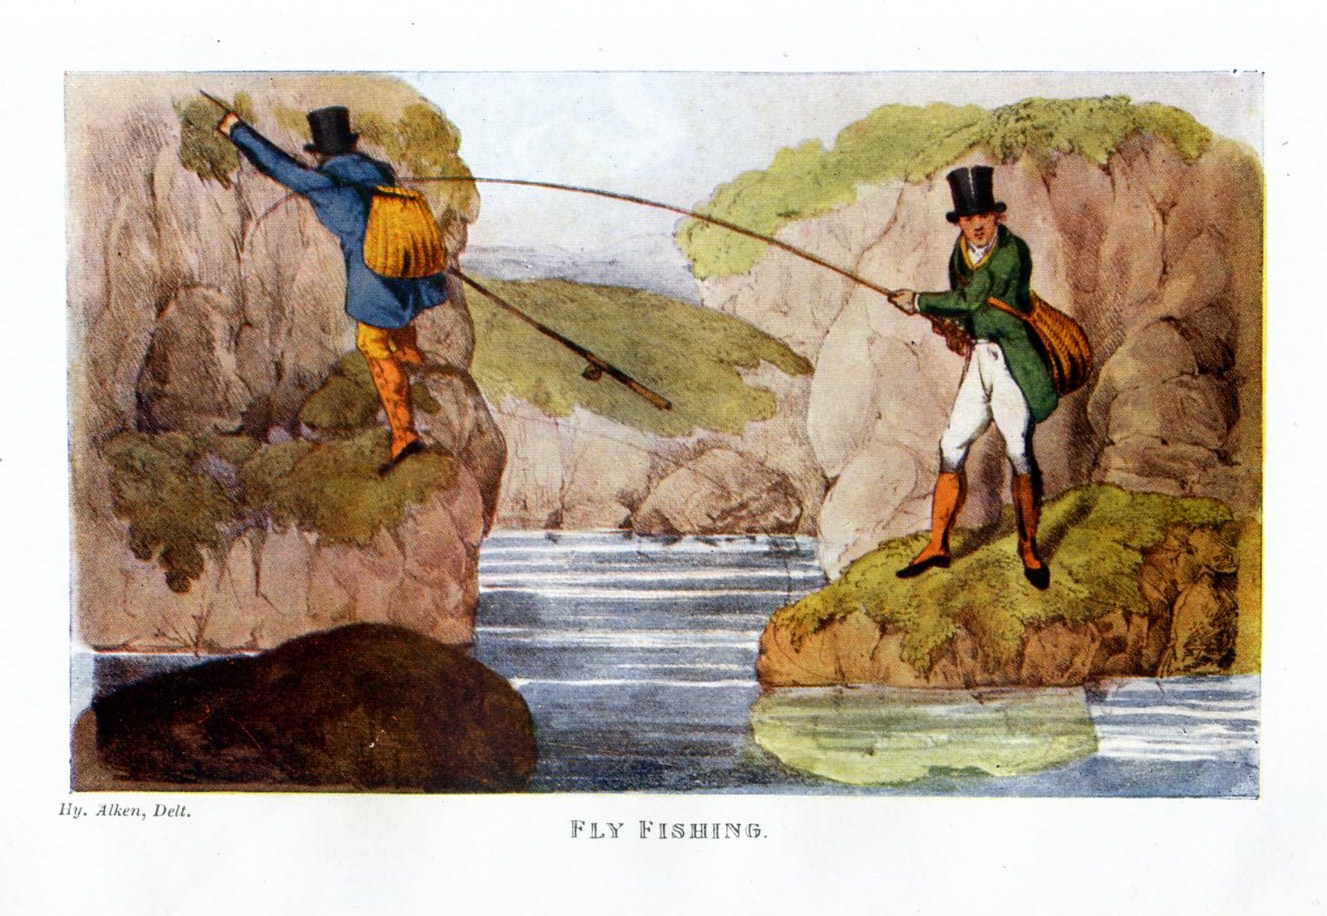 FLY FISHING FOR TROUT STREAM, VINTAGE COLOR SPORTING PRINT FISHERMAN